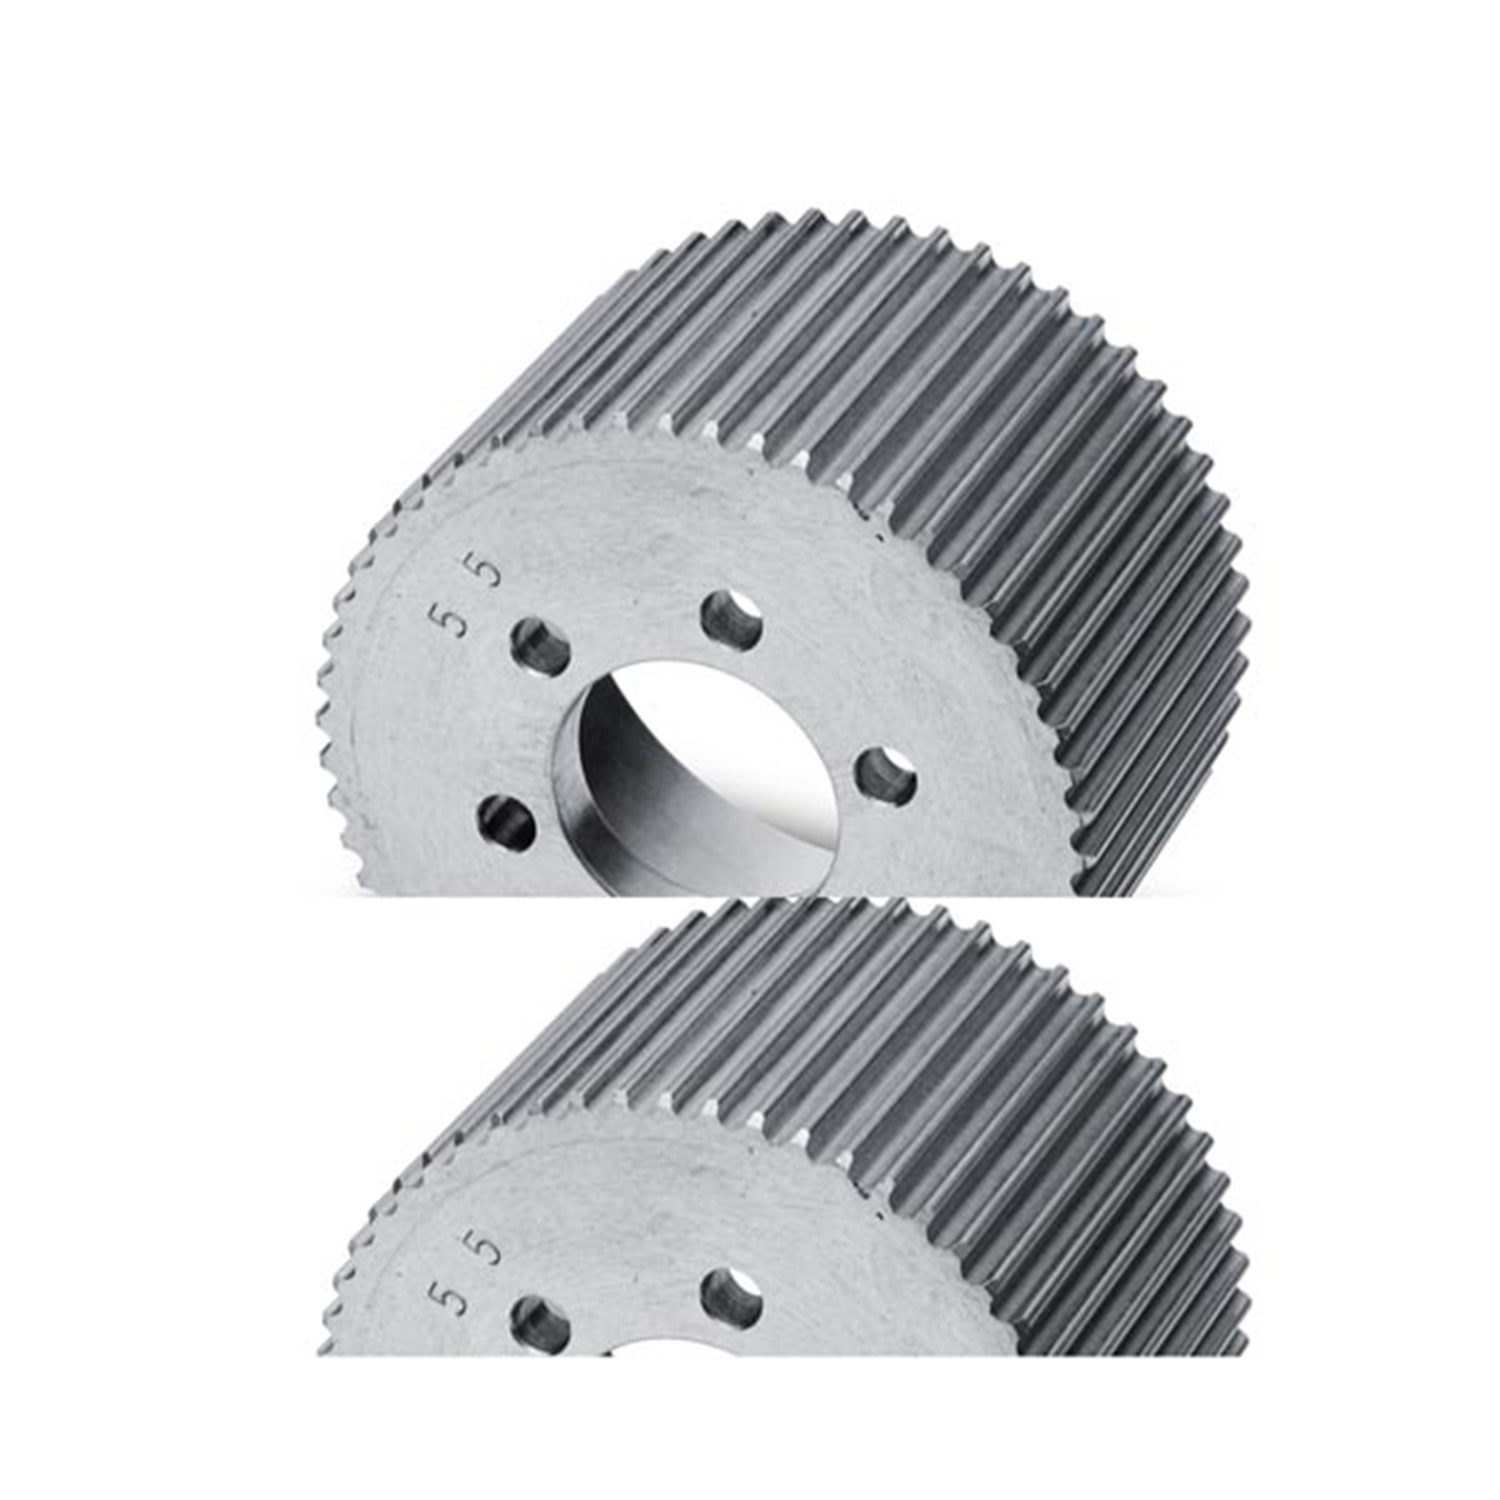 Weiand Weiand 7109-63 8mm Pitch Drive Pulley